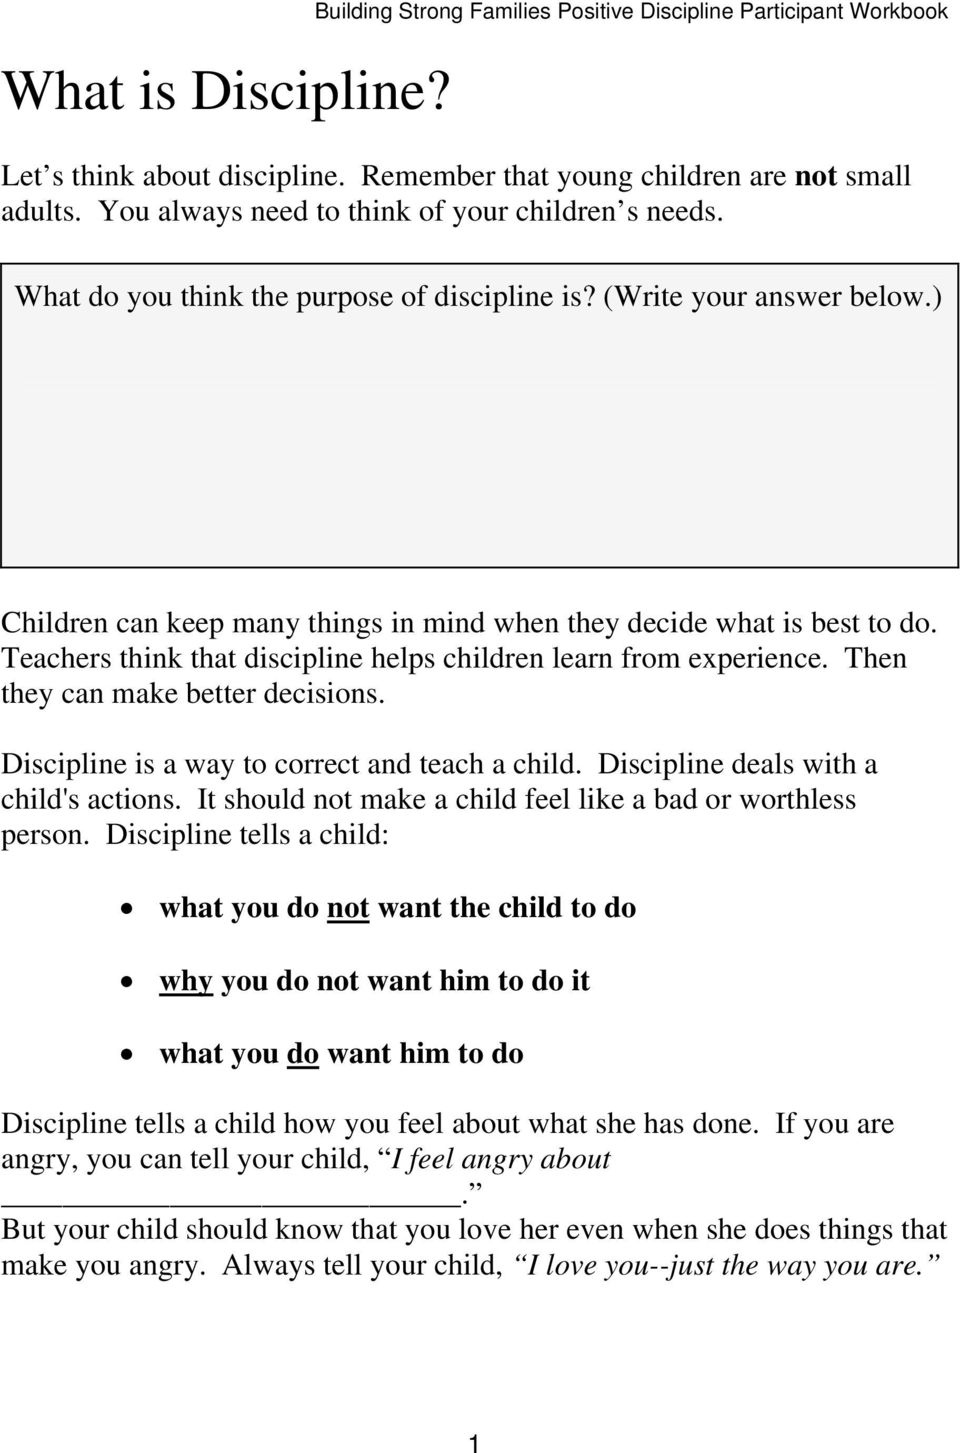 Teachers think that discipline helps children learn from experience. Then they can make better decisions. Discipline is a way to correct and teach a child. Discipline deals with a child's actions.